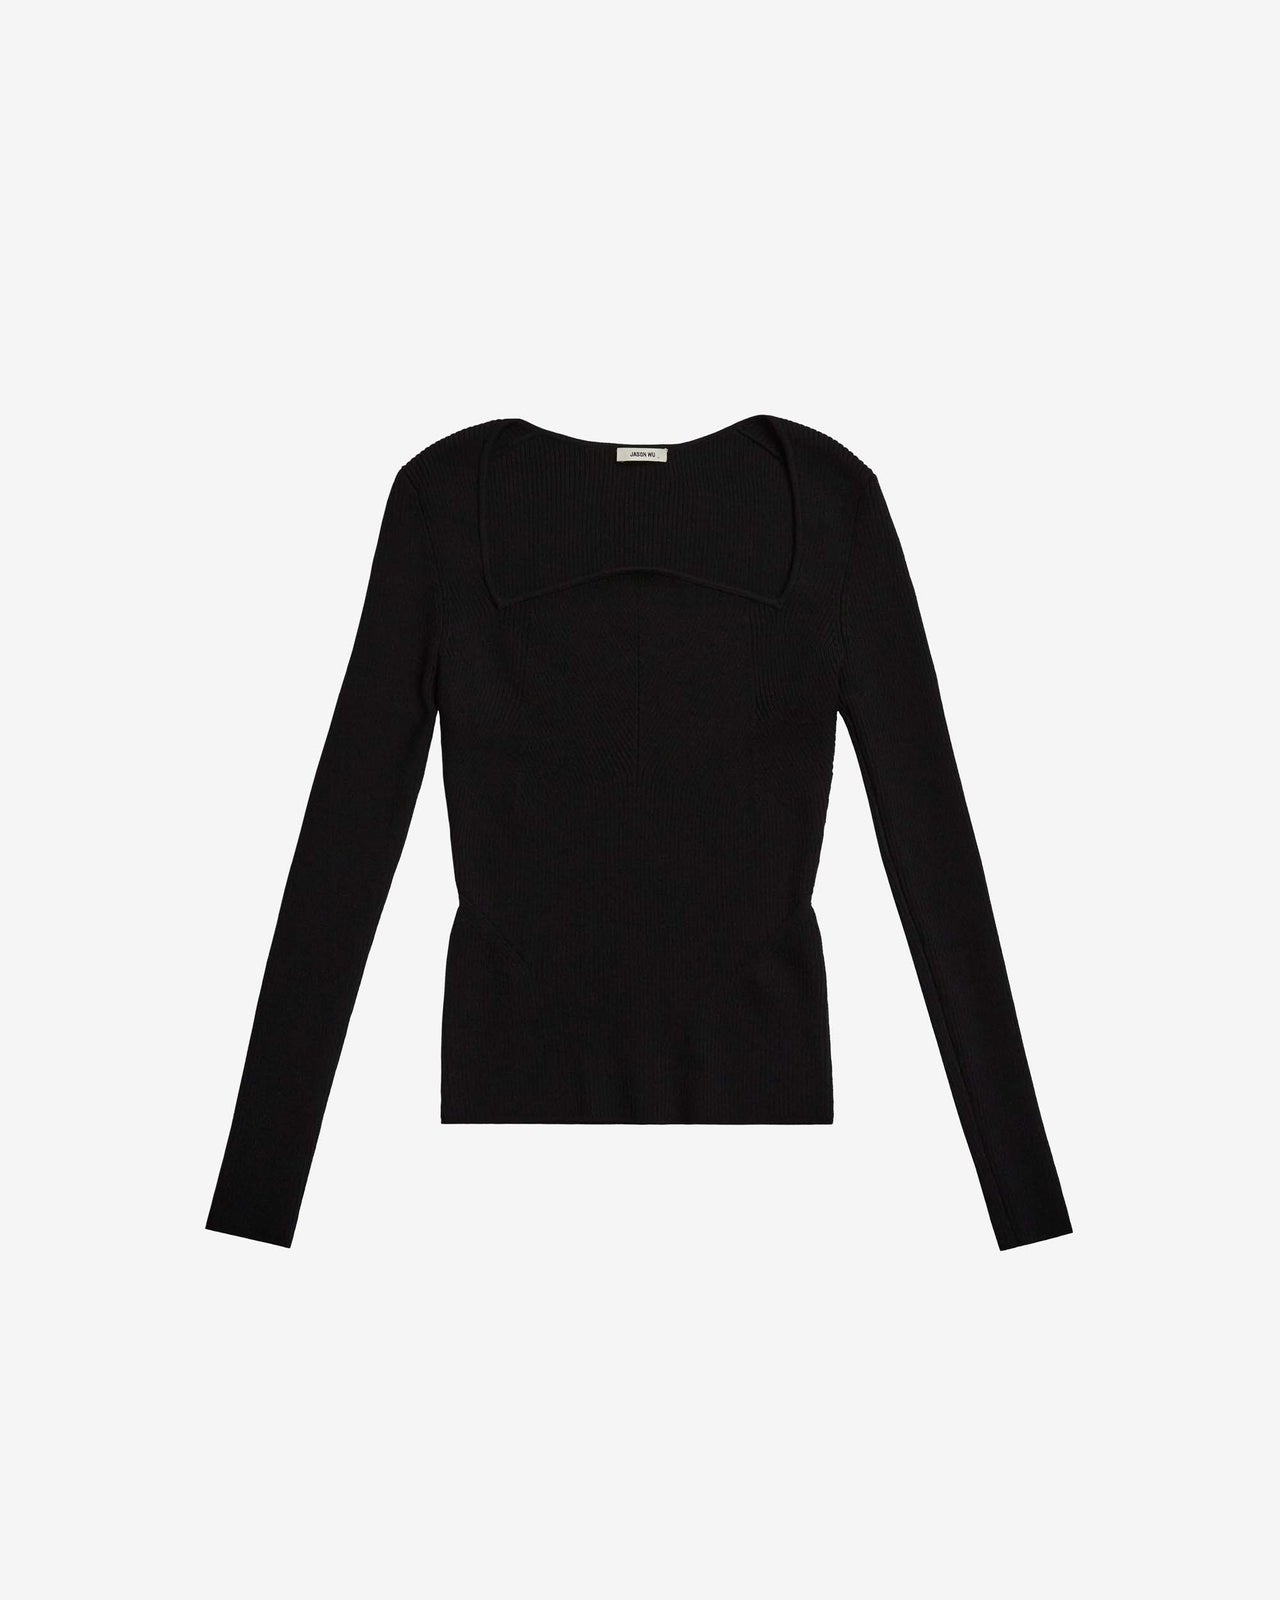 LONG SLEEVE RIB KNIT CURVED NECKLINE view 1